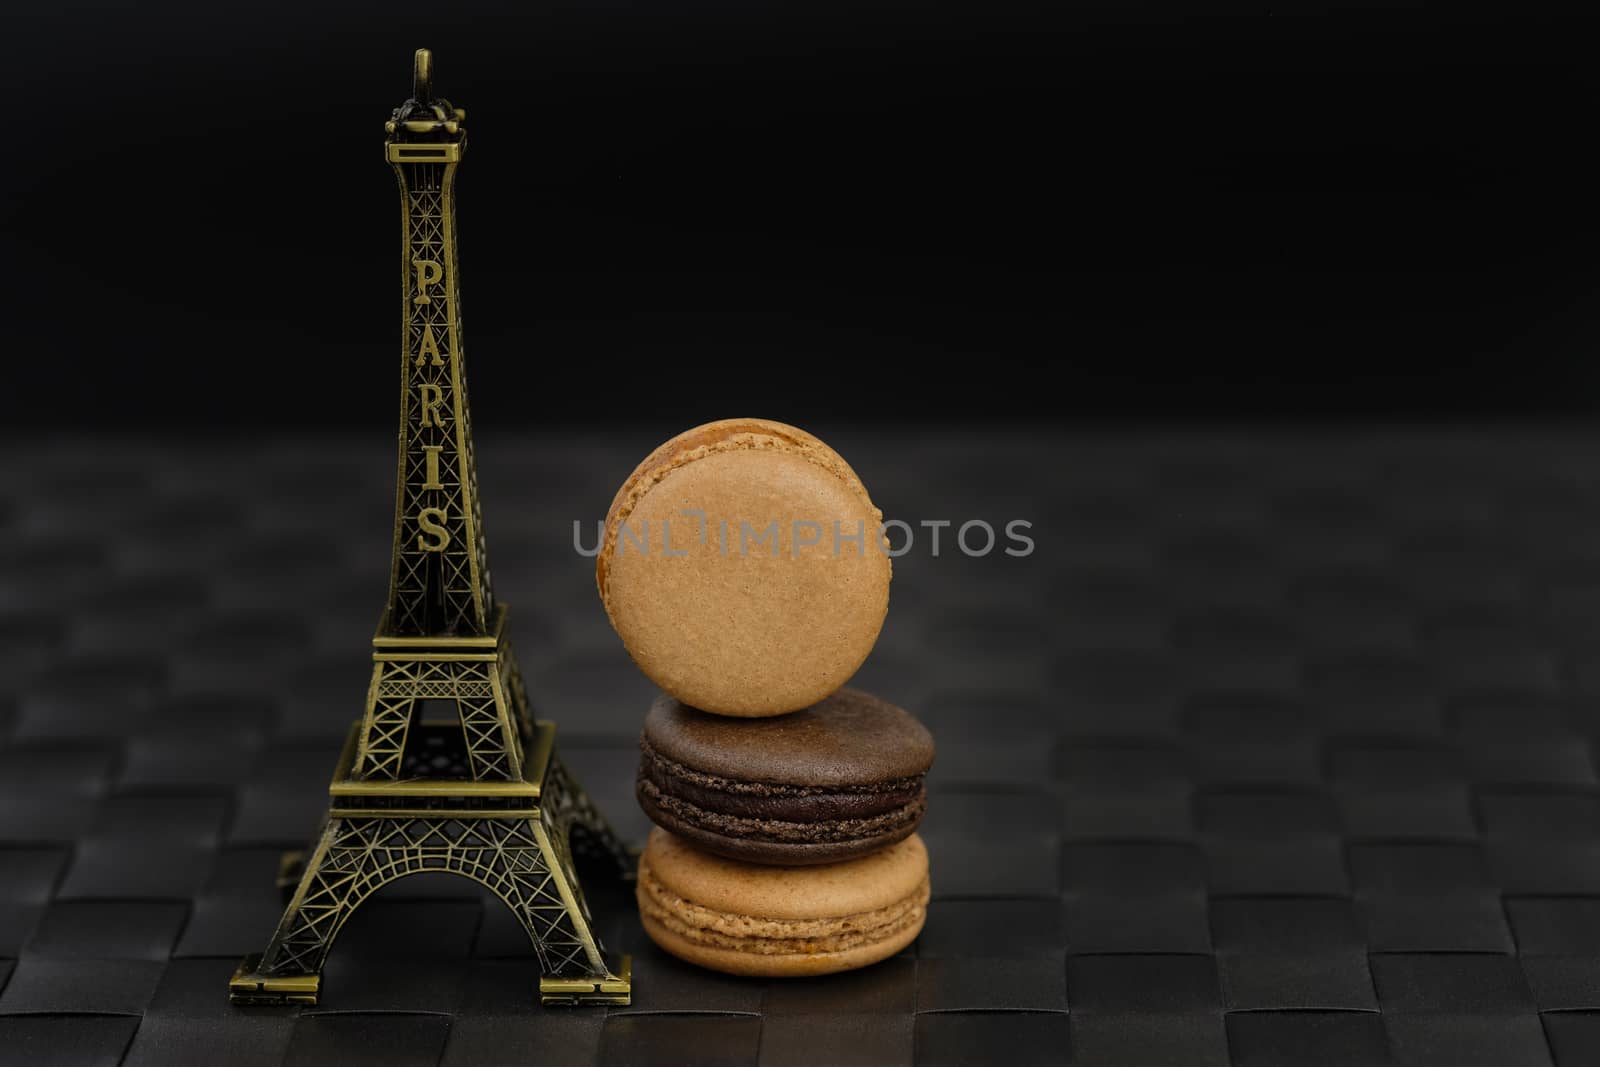 Chocolate and coffee macaroons traditional Parisian cookie and Eiffel tower model on black background in low light.